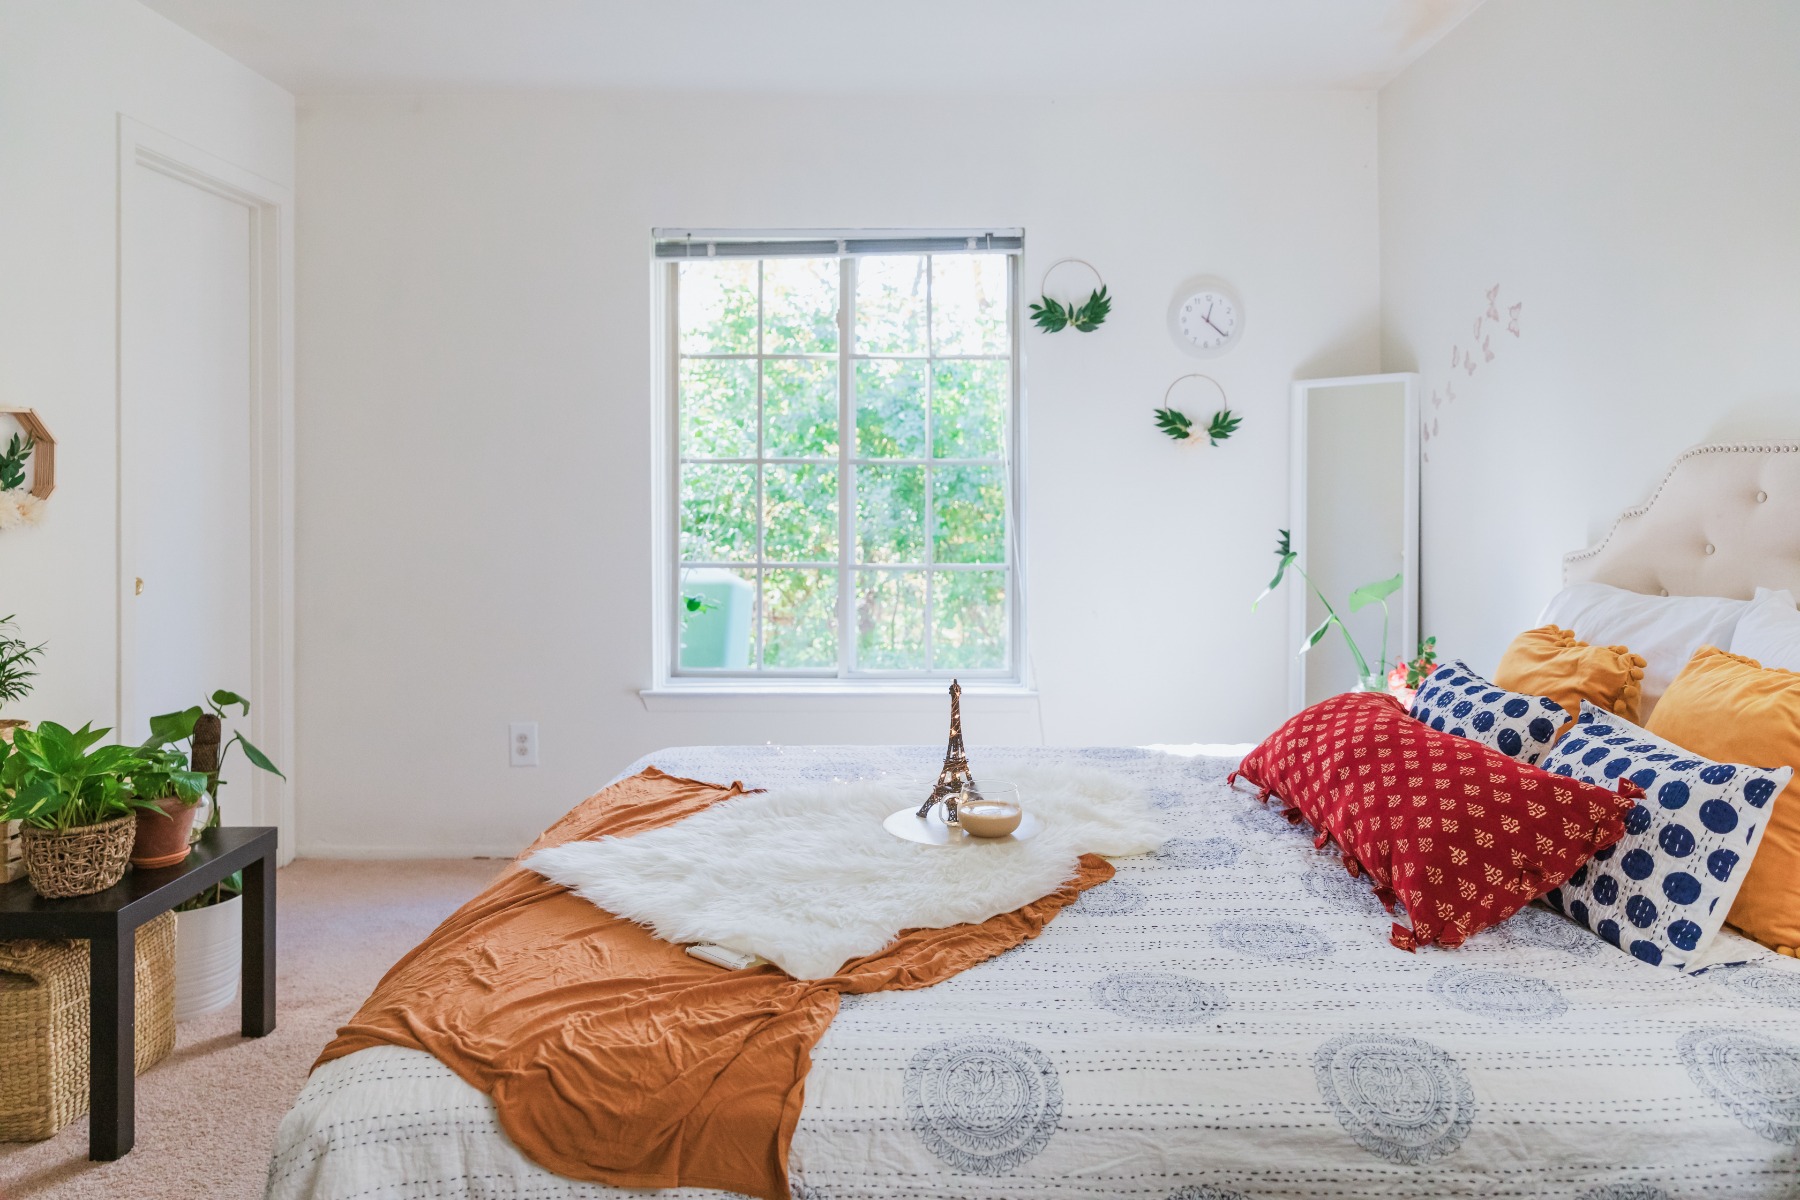 An image of a white bedroom with colourful decor